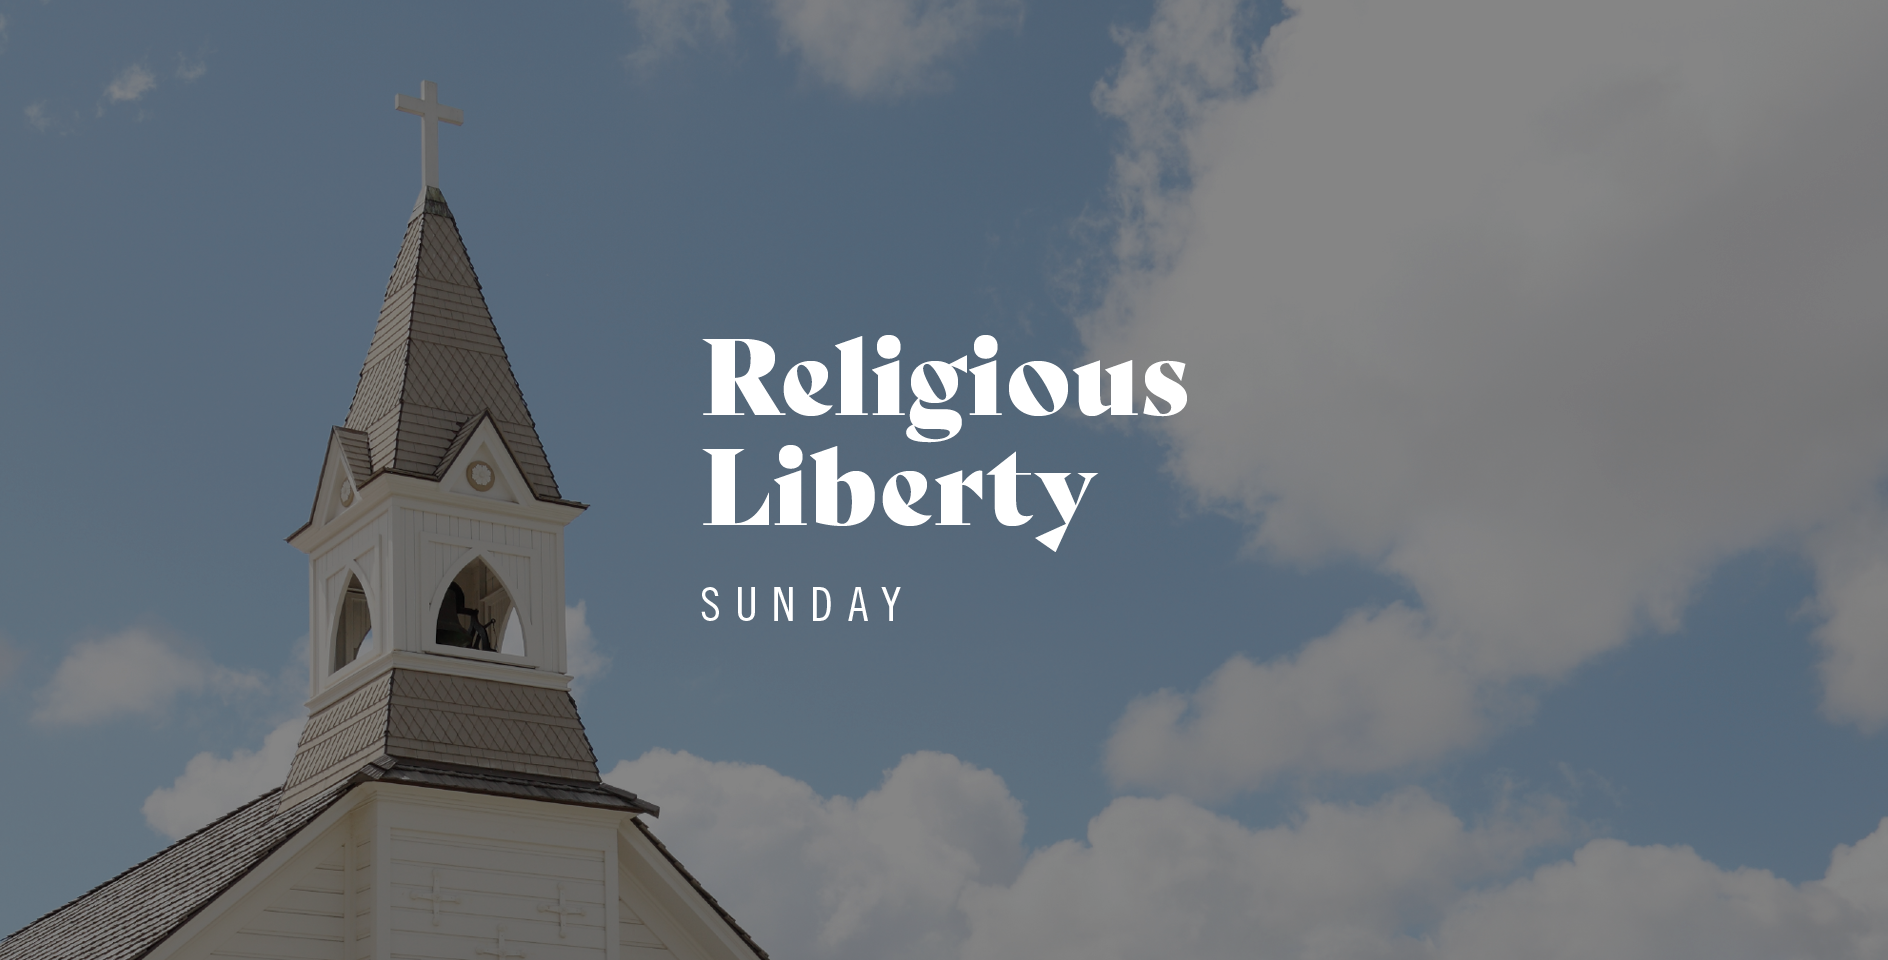 Why the ERLC Advocates for Religious Liberty